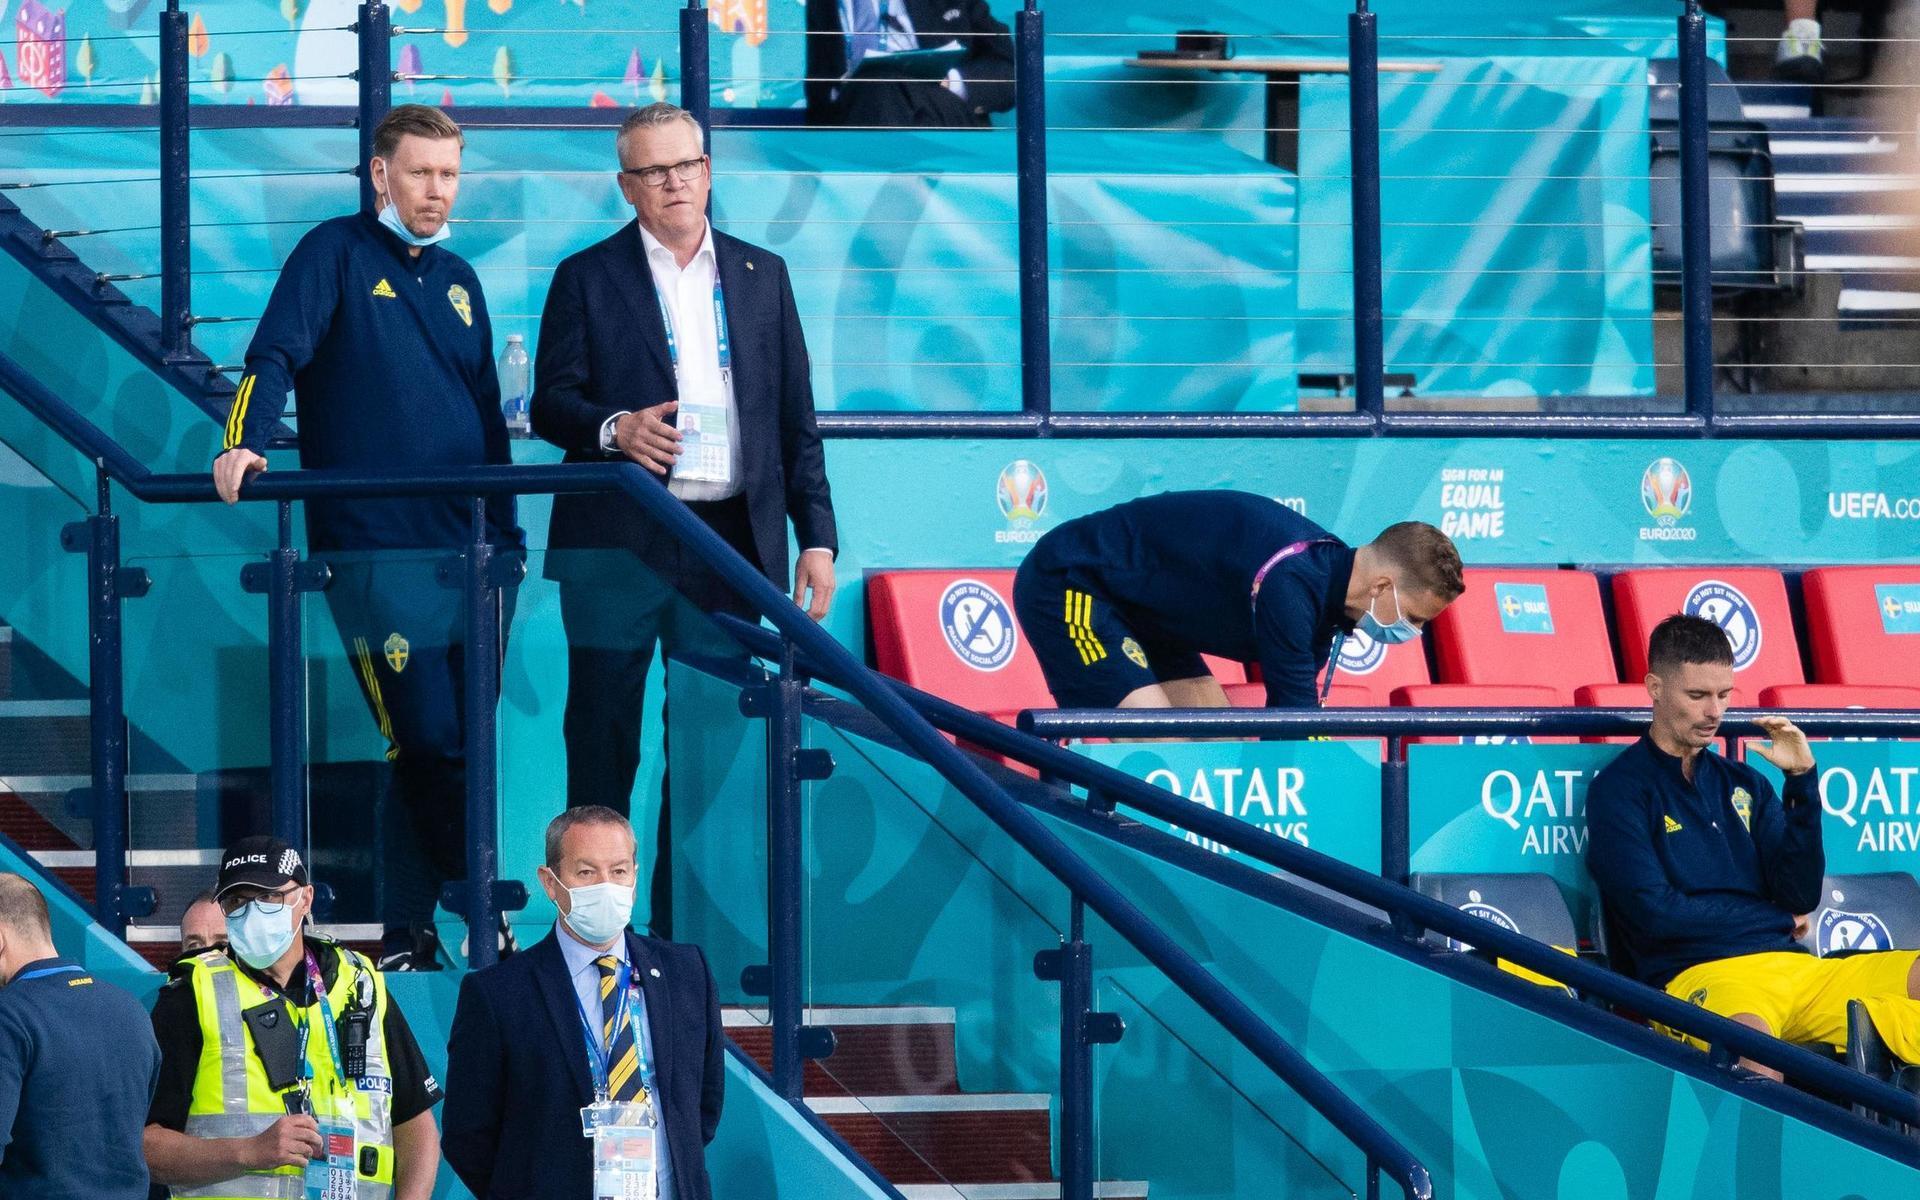 Assistant coach Peter Wettergren and head coach Janne Andersson of Sweden during the UEFA Euro 2020 Football Championship round of 16 match between Sweden and Ukraina on June 29, 2021 in Glasgow. 
